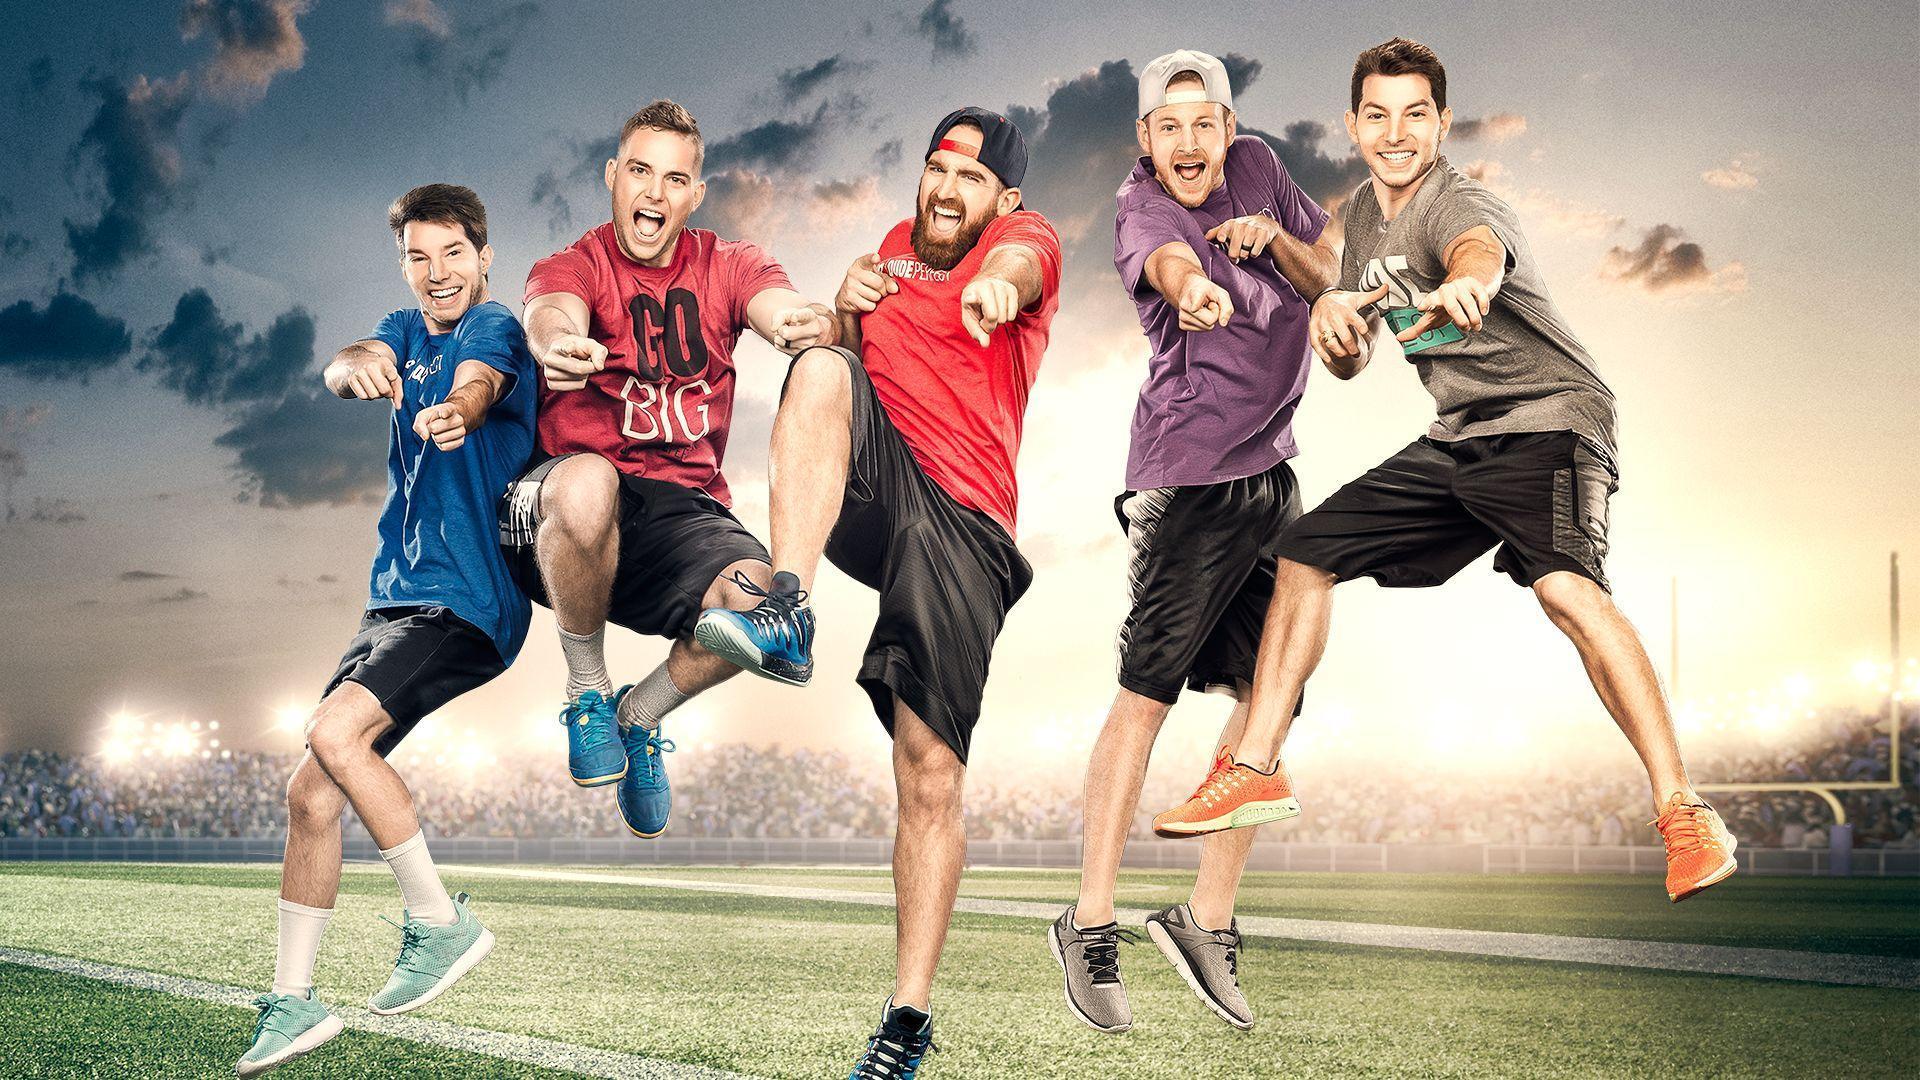 Dude Perfect Wallpapers - Wallpaper Cave